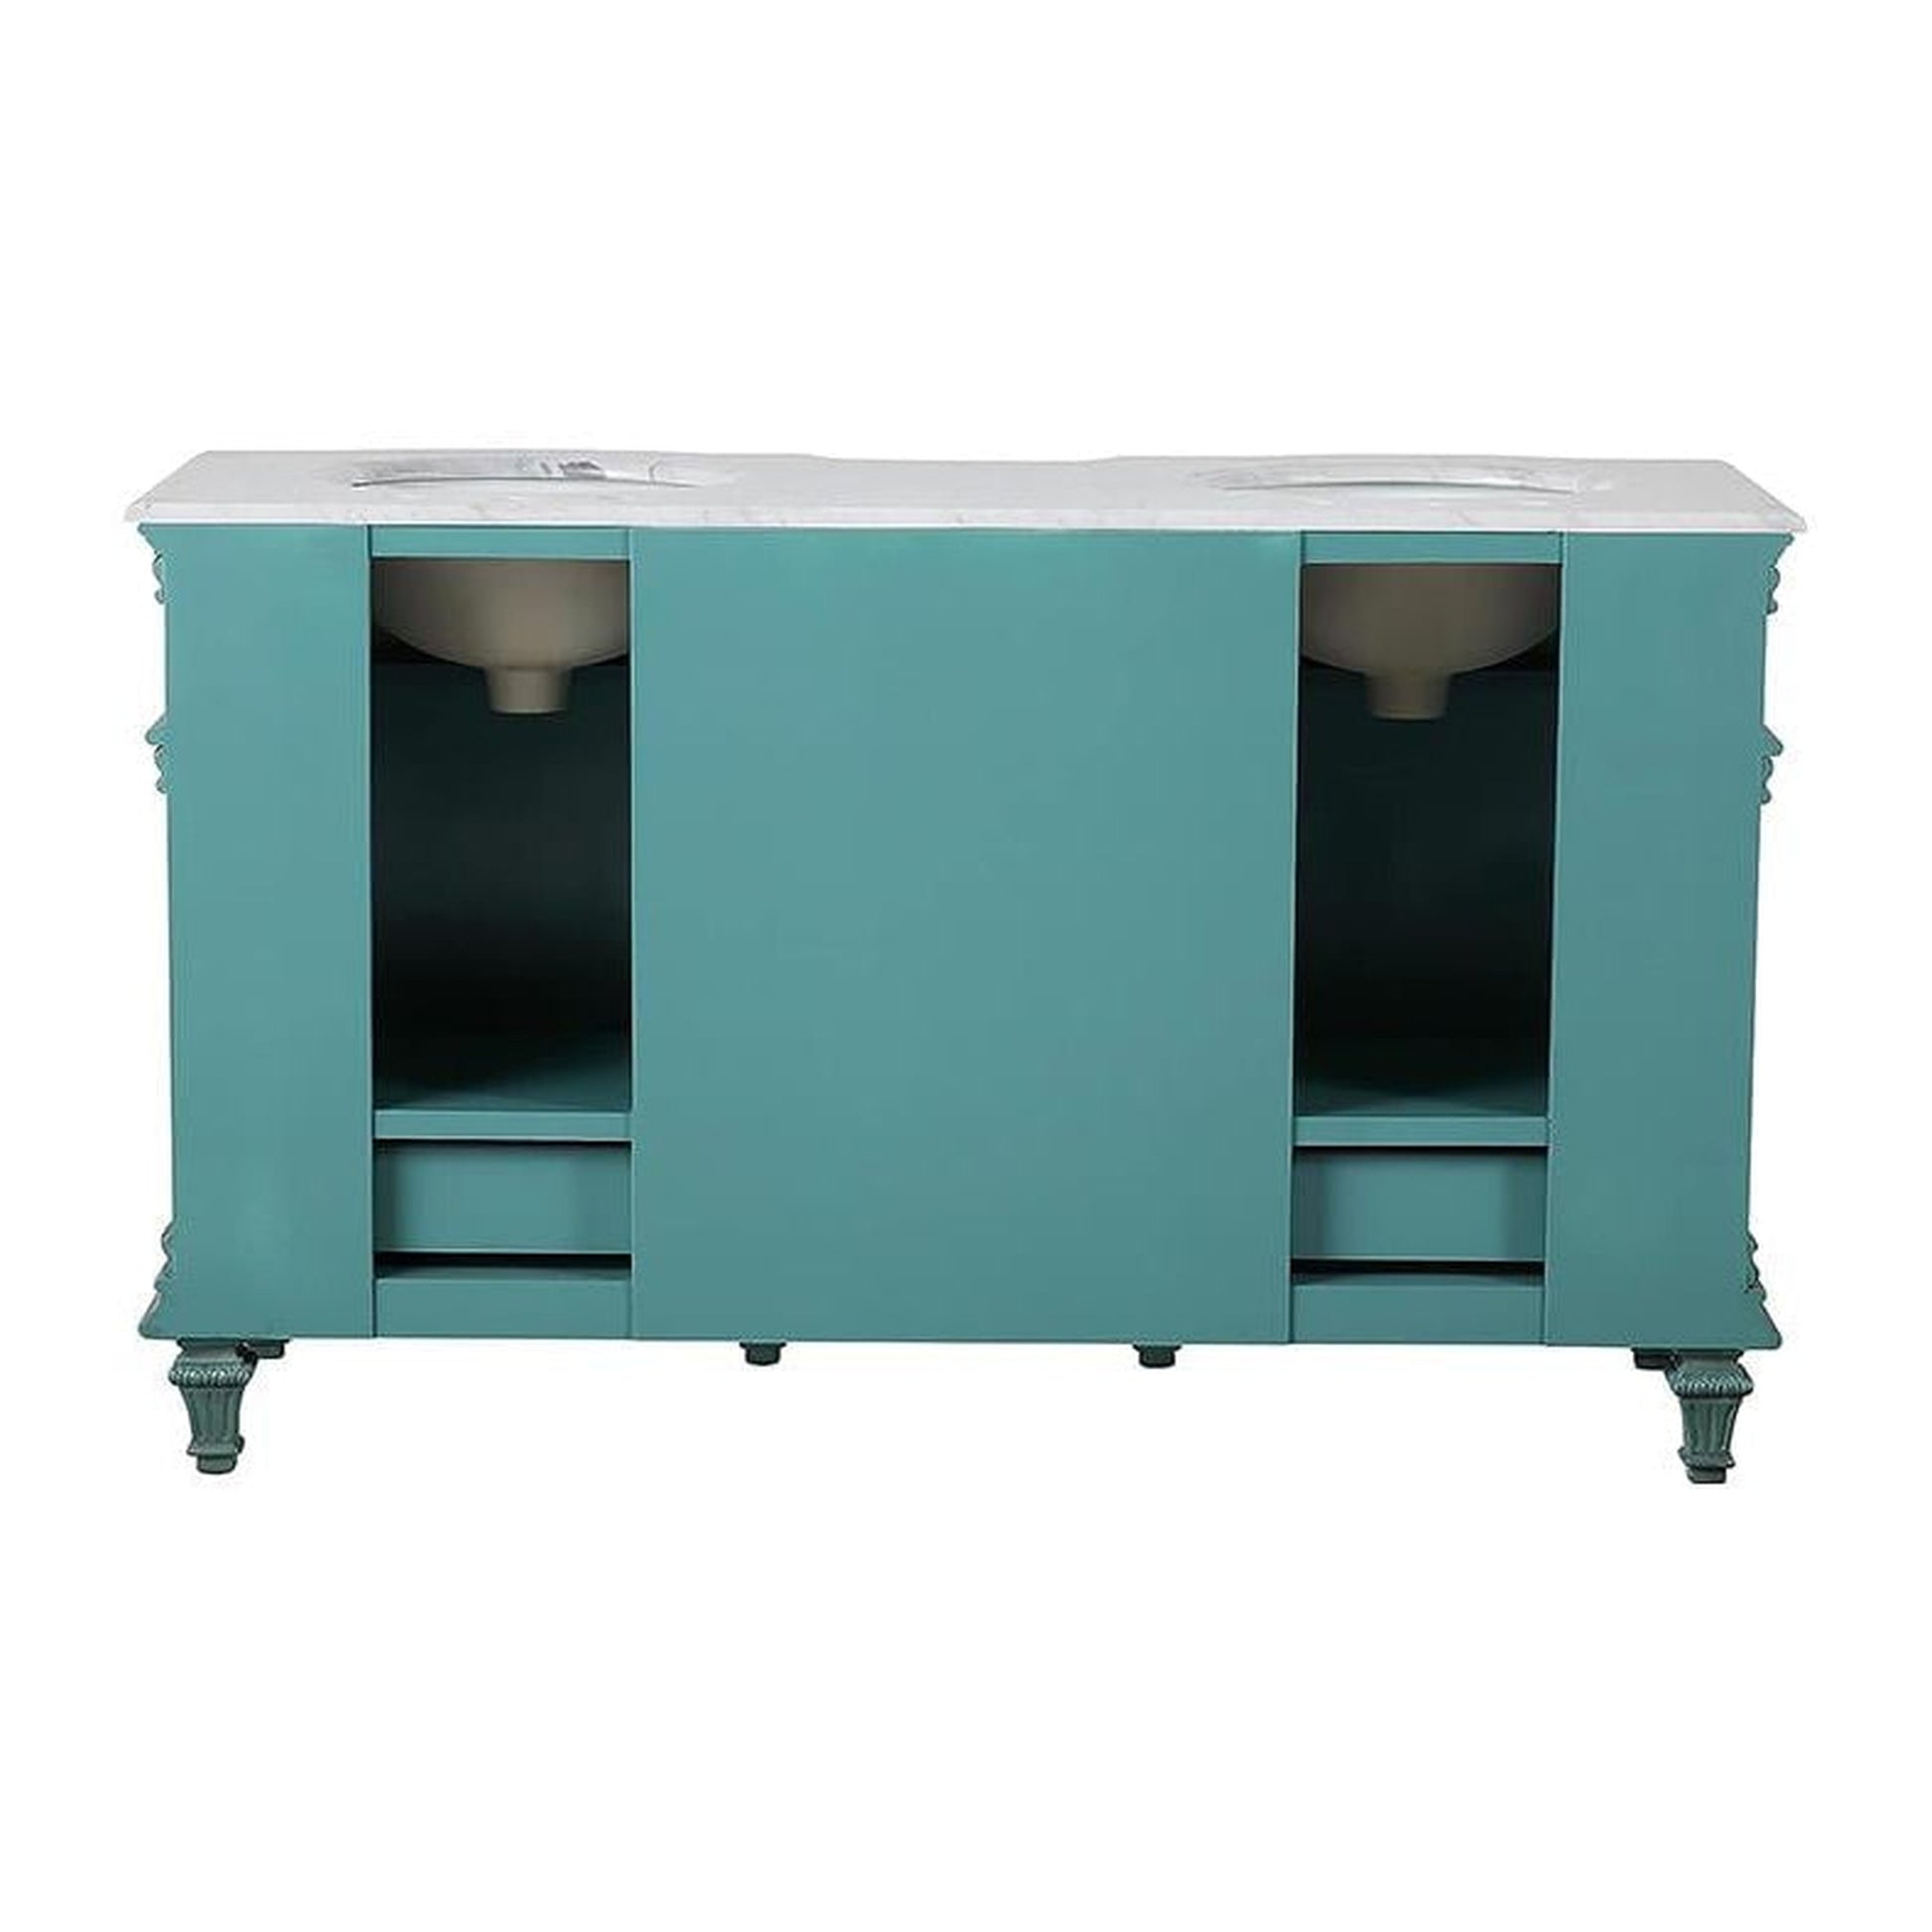 Silkroad Exclusive 60" Double Sink Retro Green Bathroom Vanity With Carrara White Marble Countertop and White Ceramic Undermount Sink